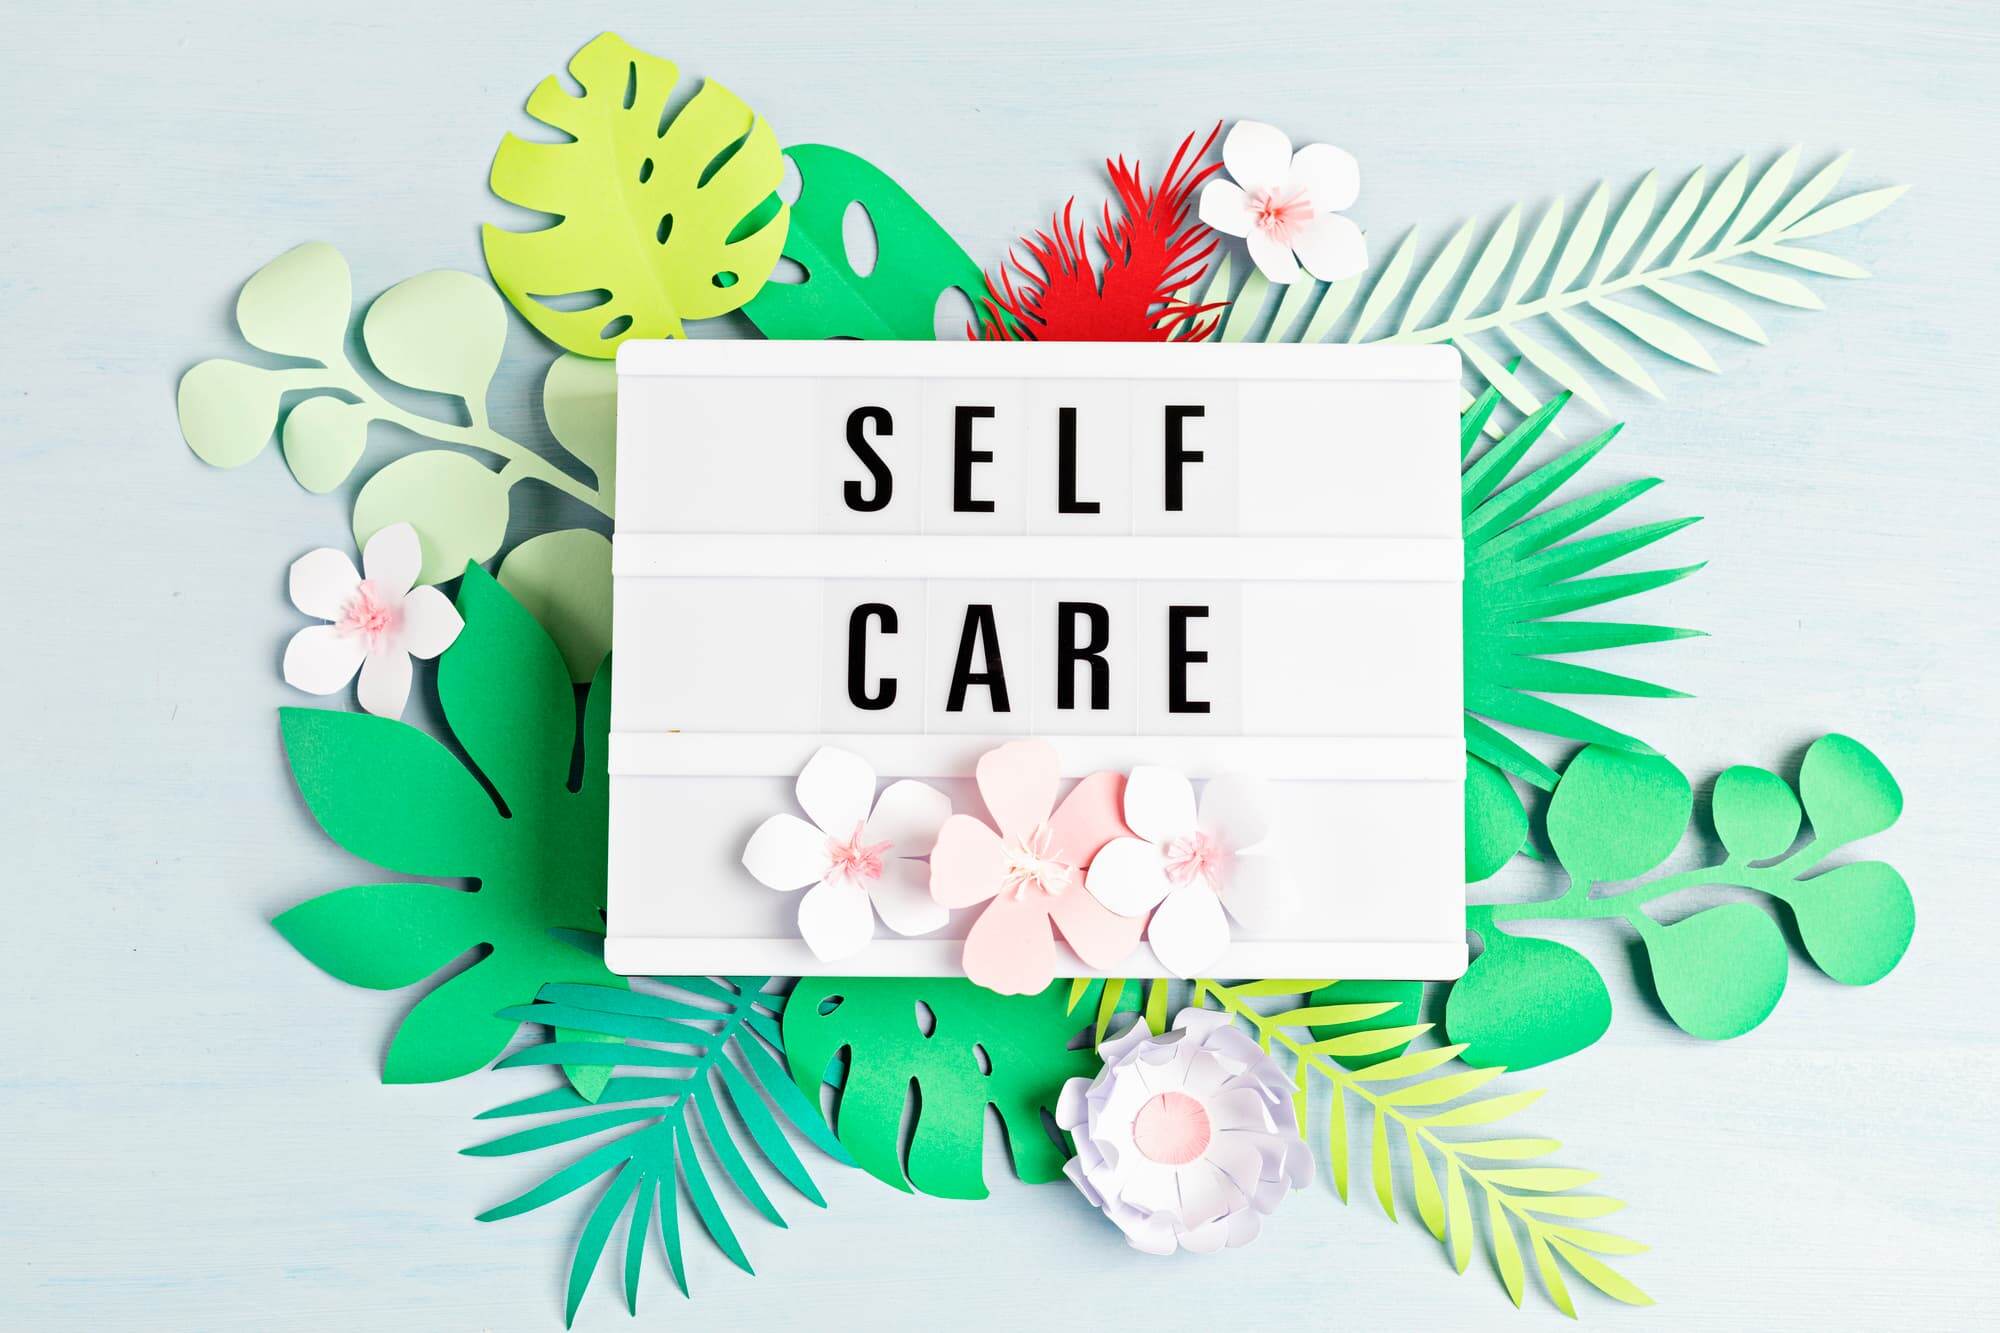 self care card with floral decoration